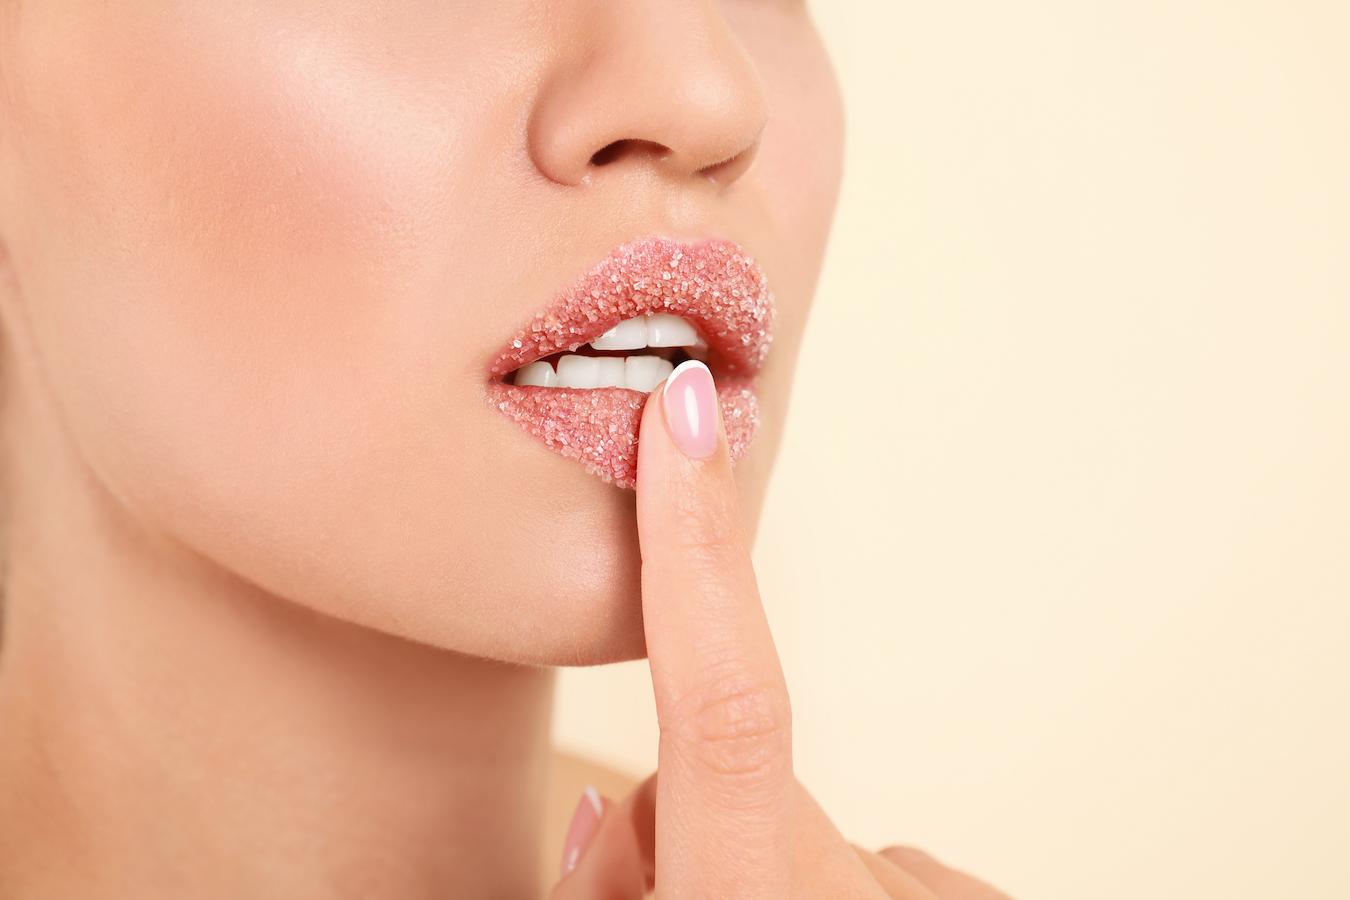 Exfoliate your lips before applying a matte lipstick to make for a smooth surface